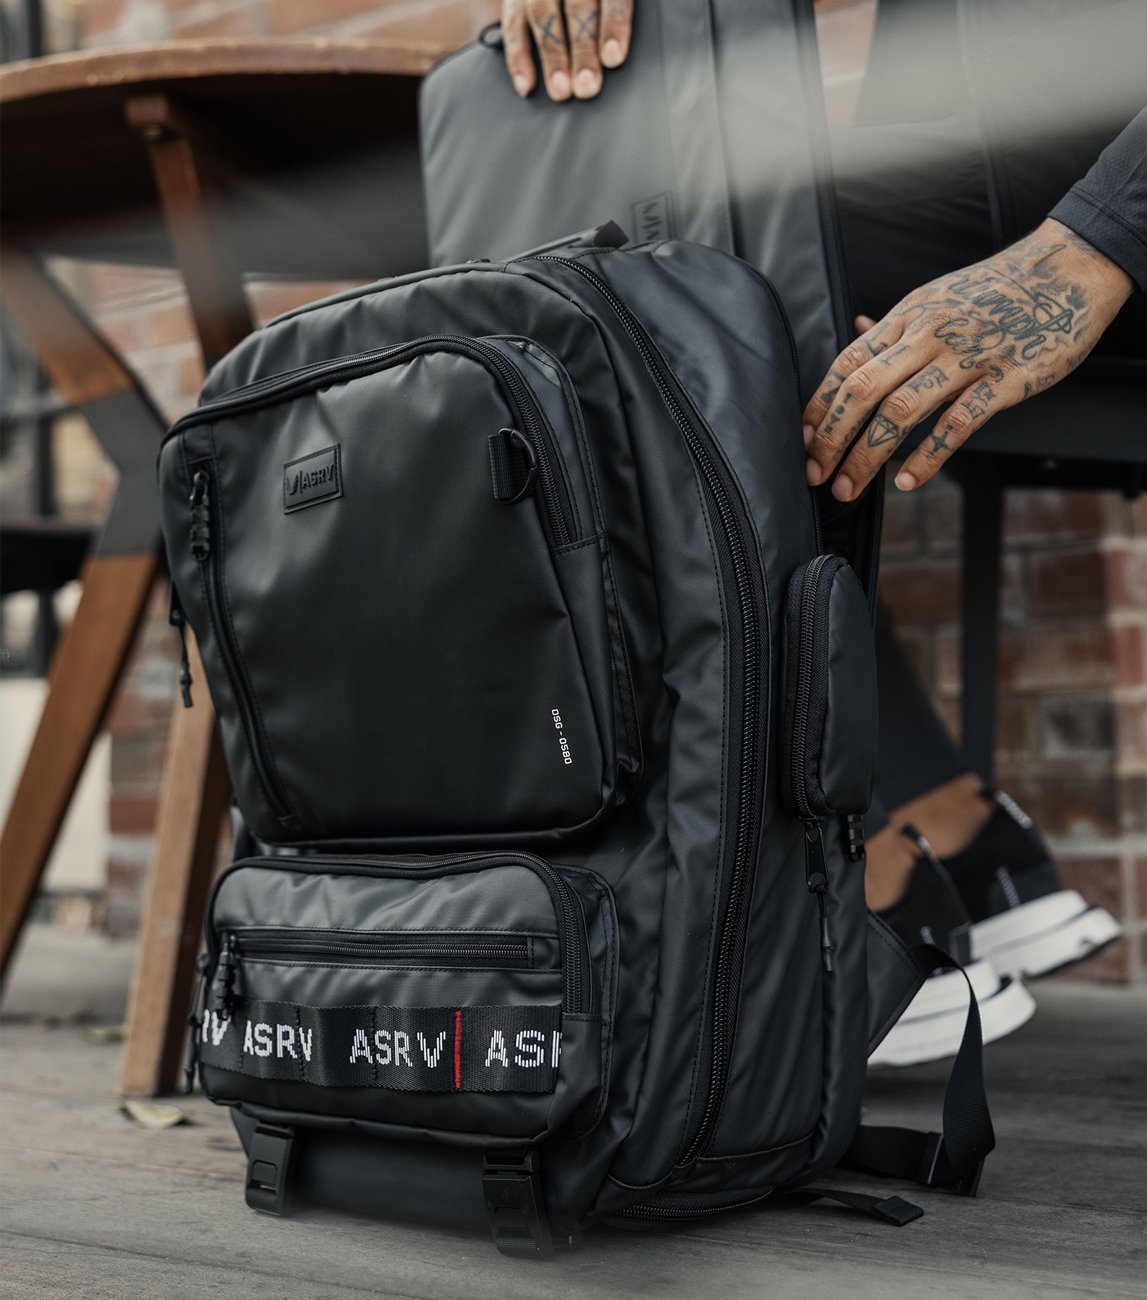 NEW RELEASE // Travel Bag Collection - Now Live - ASRV